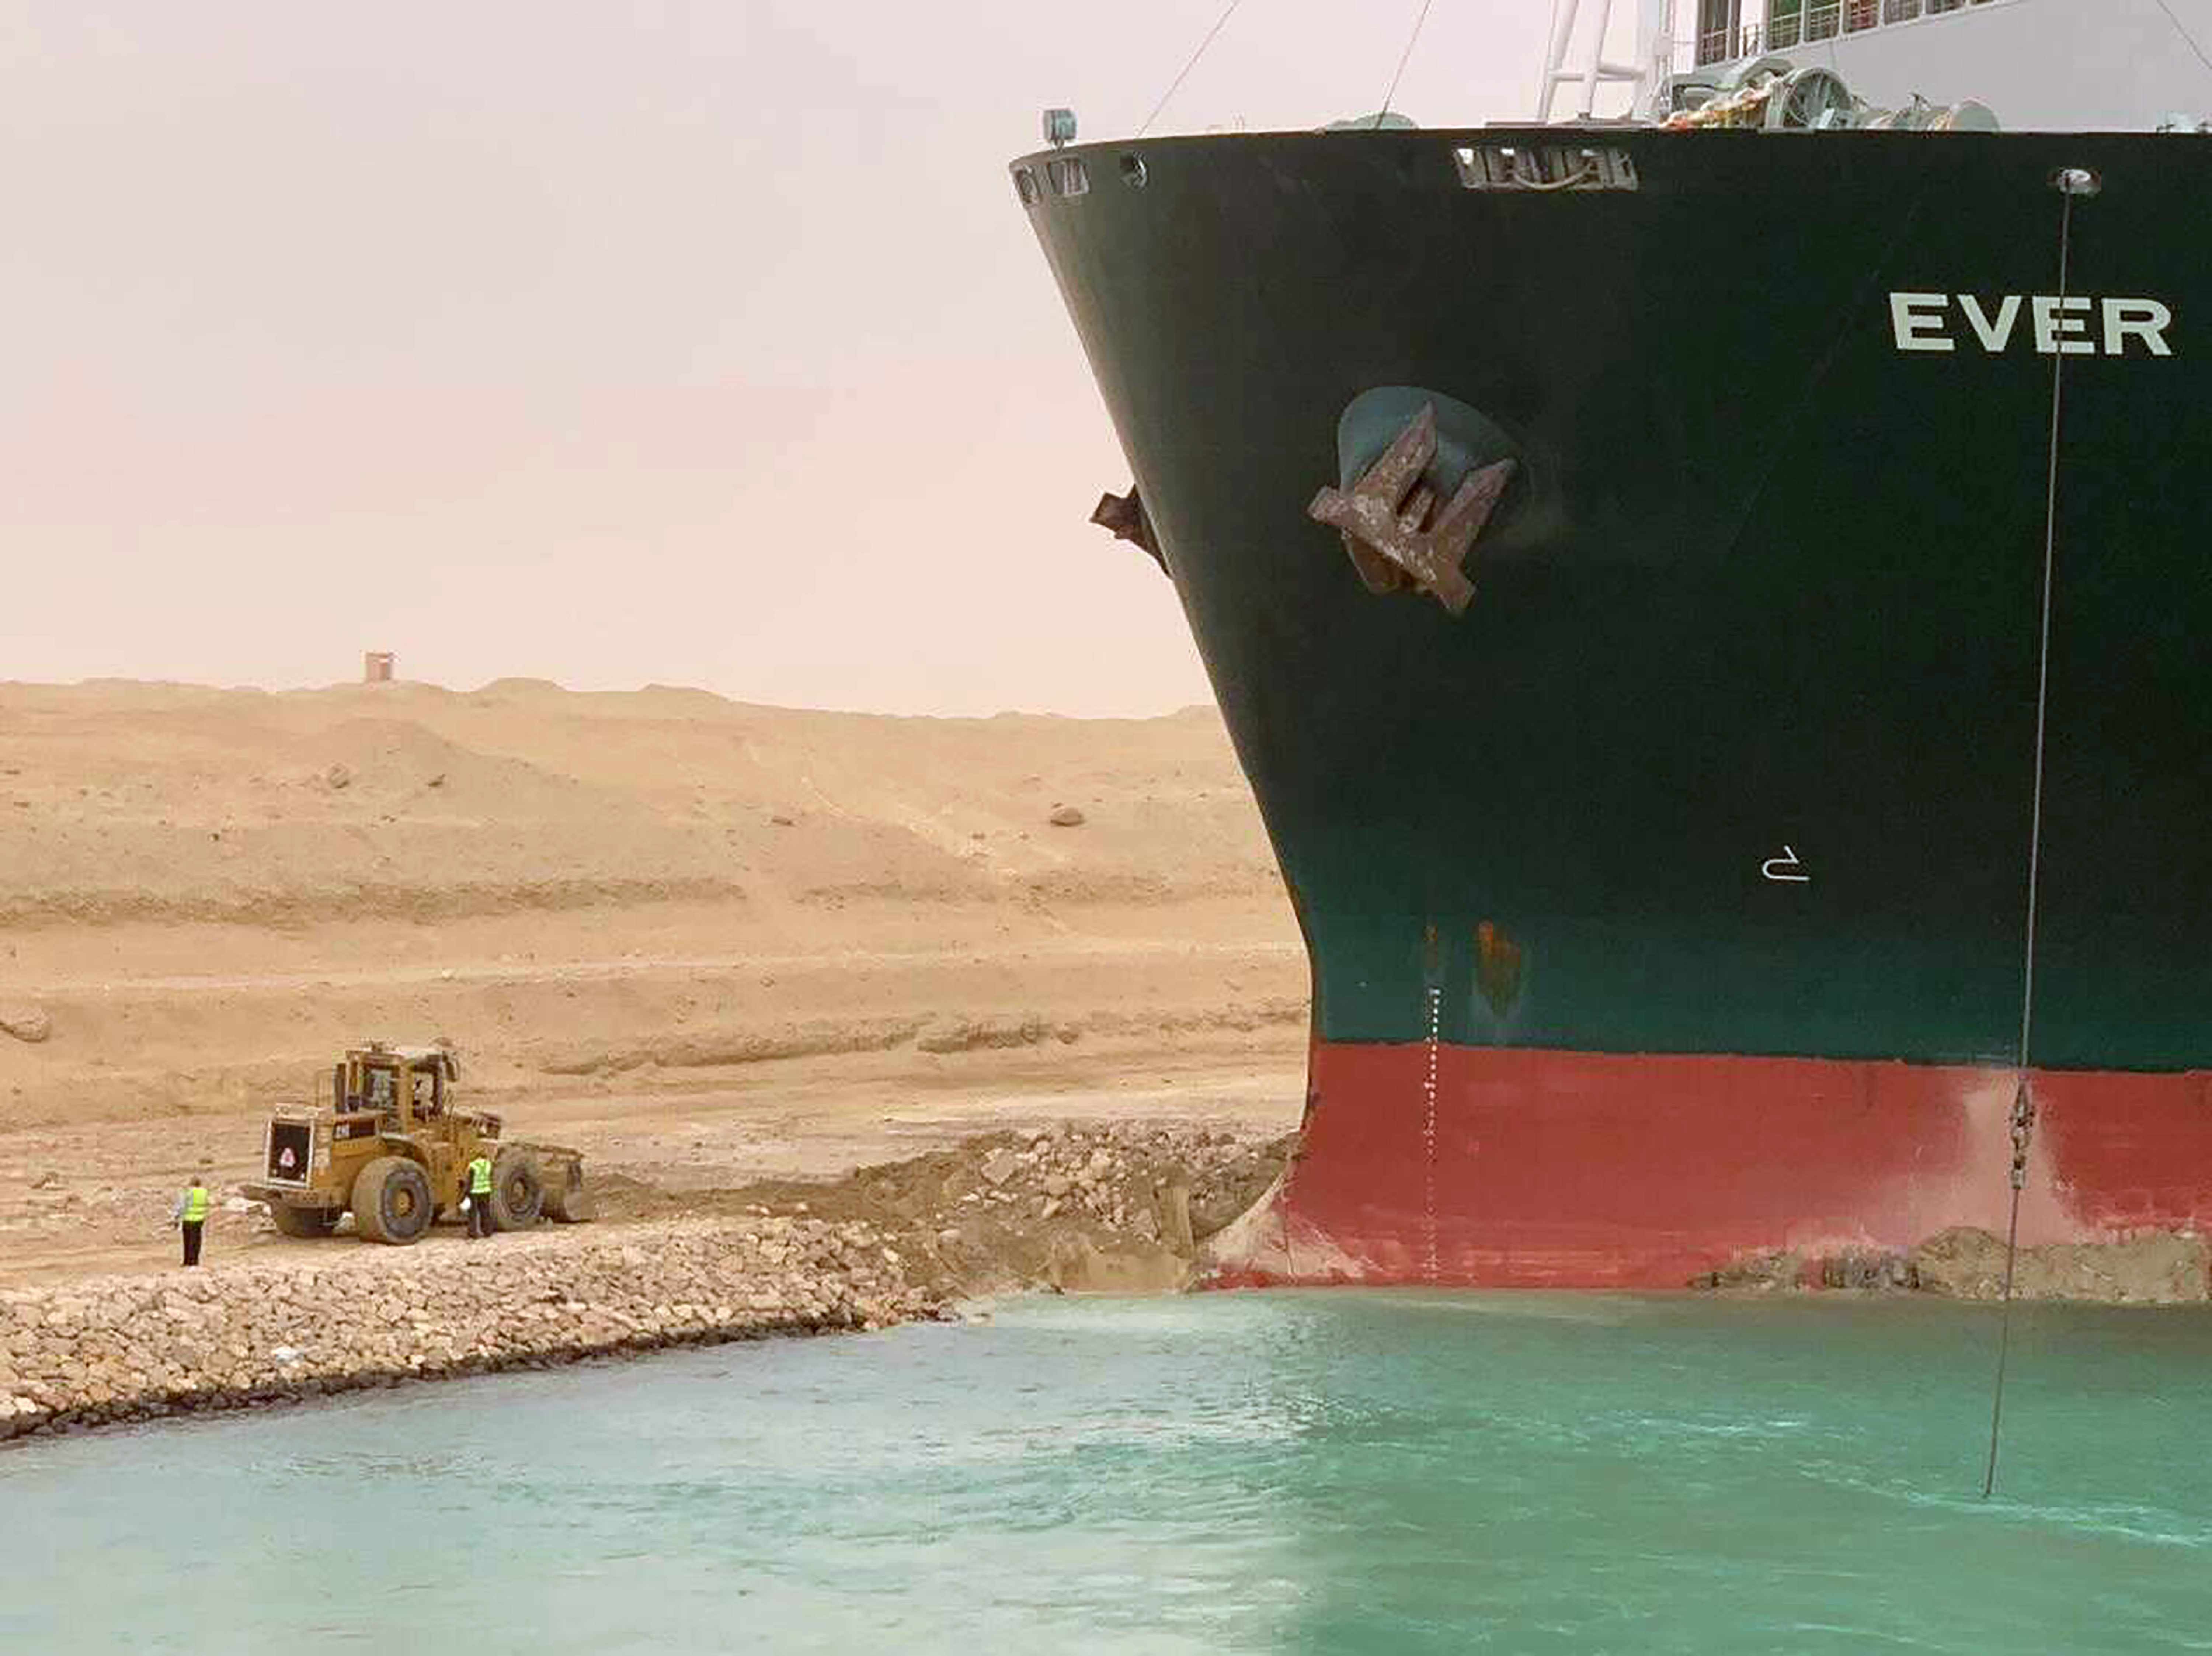 The photos show a container ship trapped in the Suez Canal